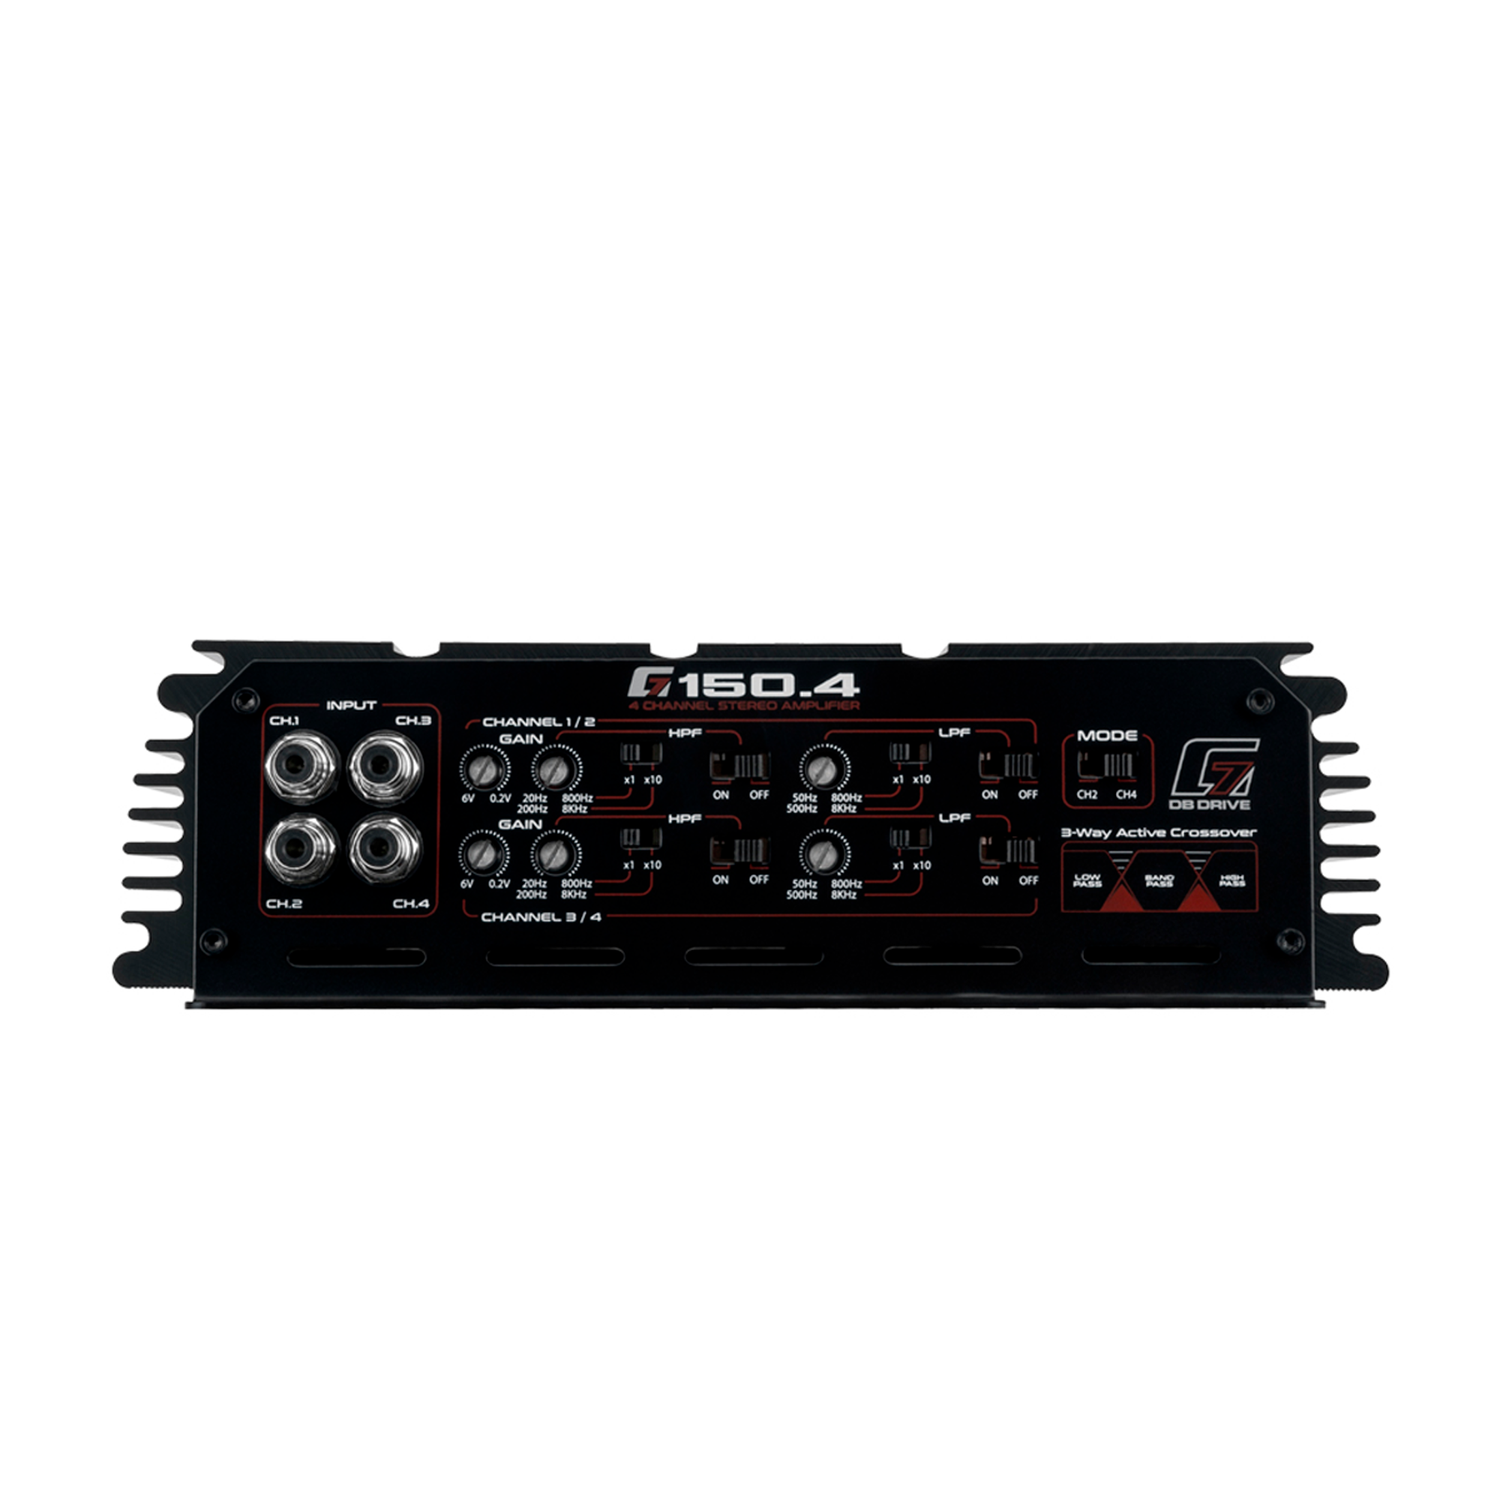 Amplificador 4 Canales DB Drive G7 150.4 150 Watts Clase D